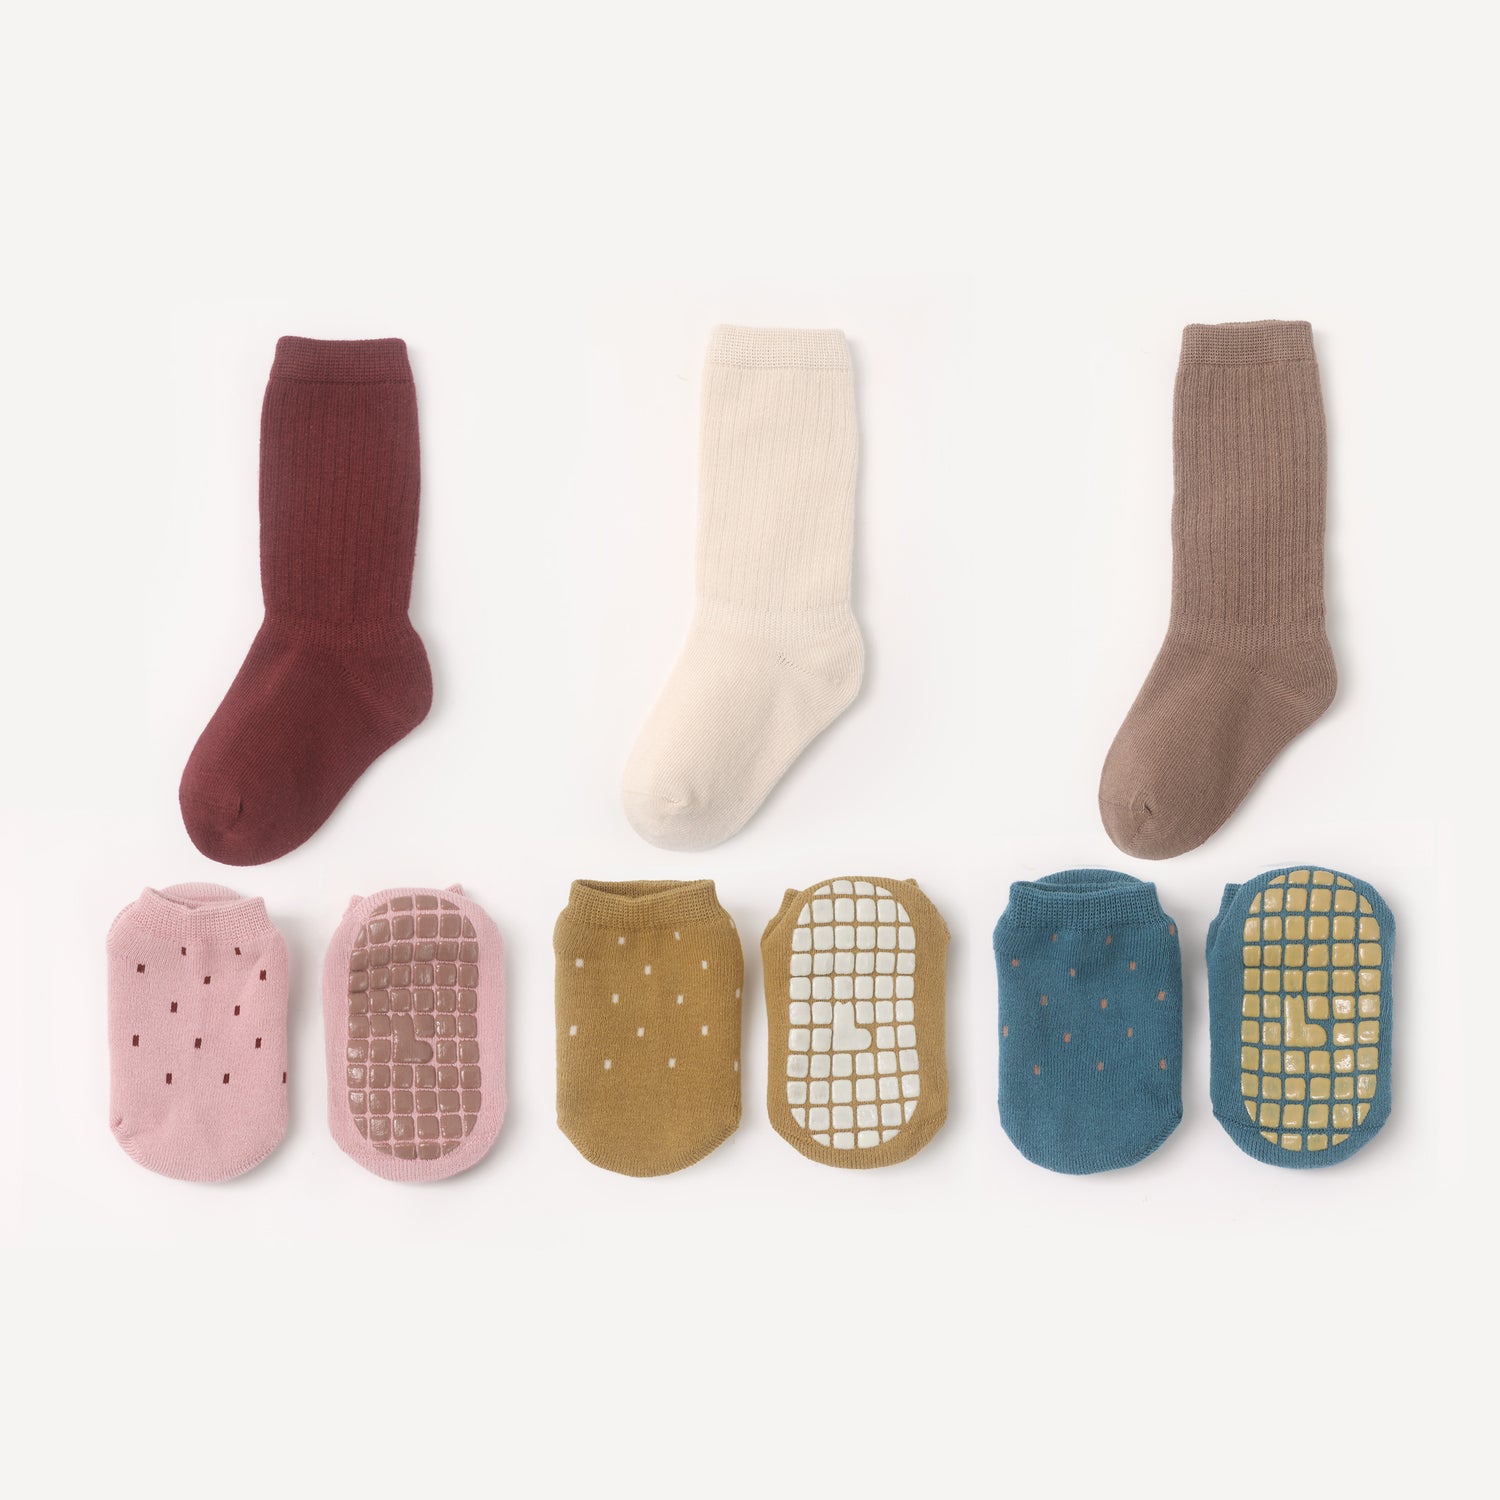 Expertly designed socks for babies that promise to stay on, reducing the hassle for parents.